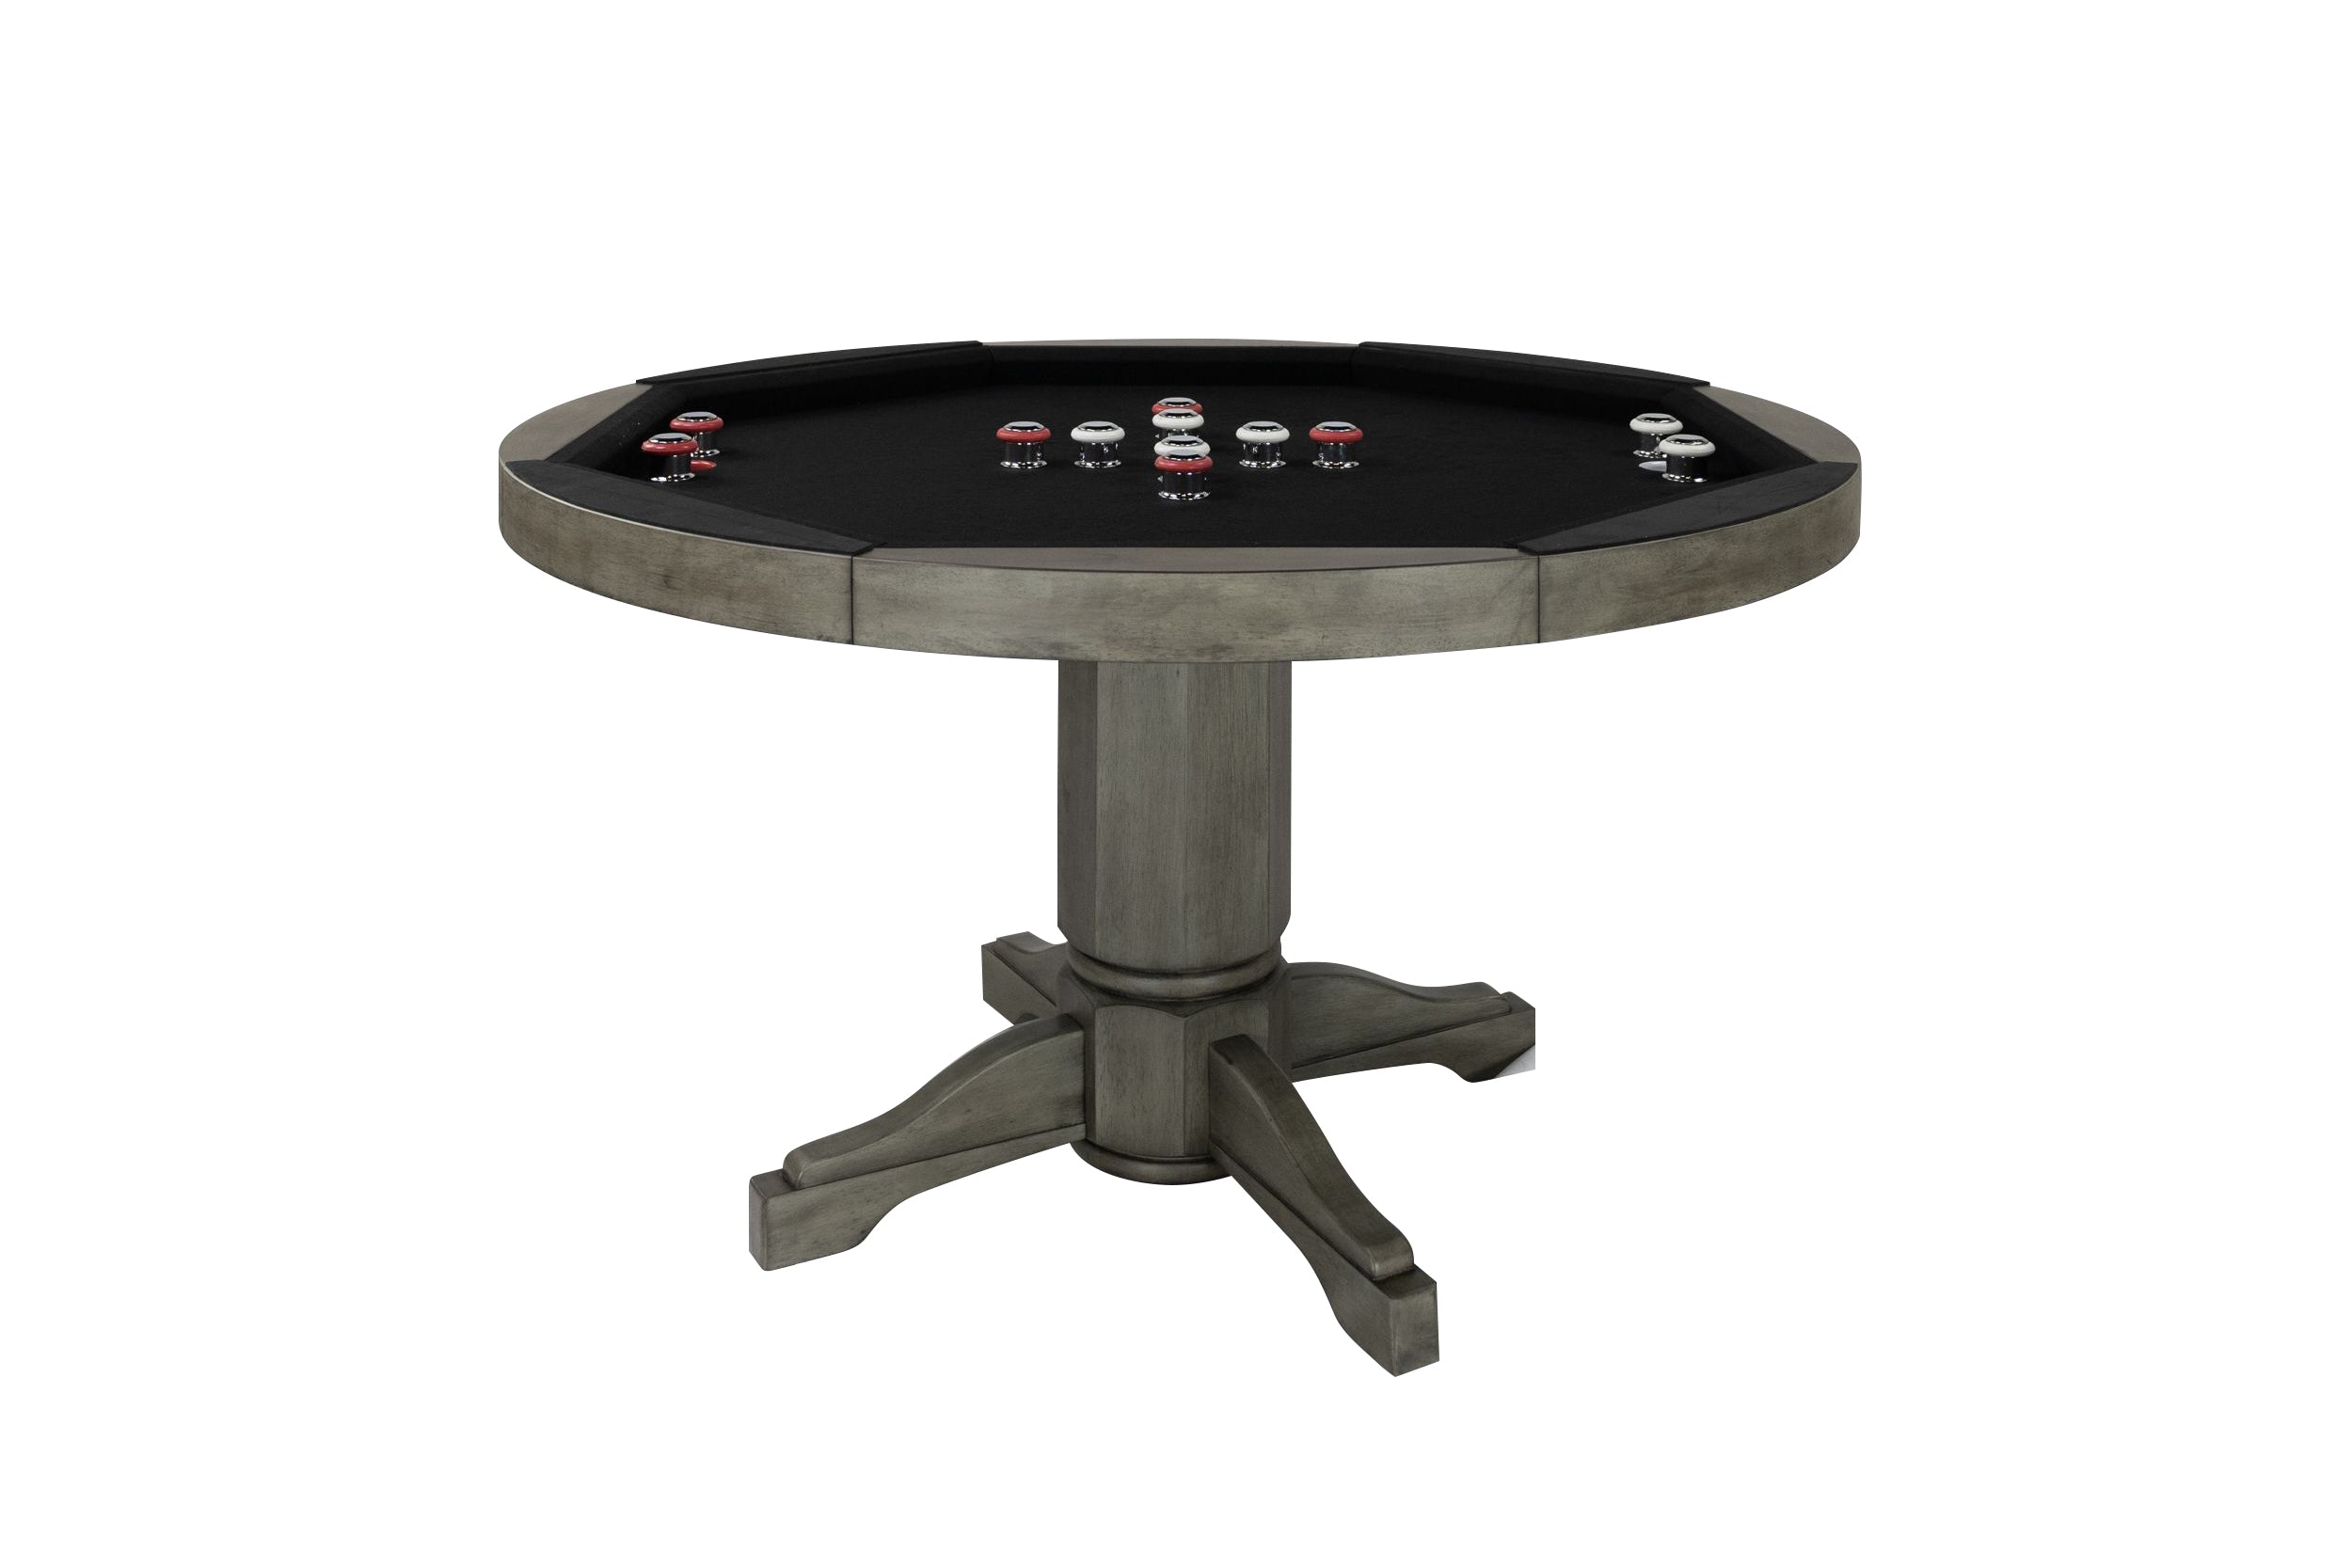 Legacy Billiards Heritage 3 in 1 Game Table with Poker, Dining and Bumper Pool in Overcast Finish